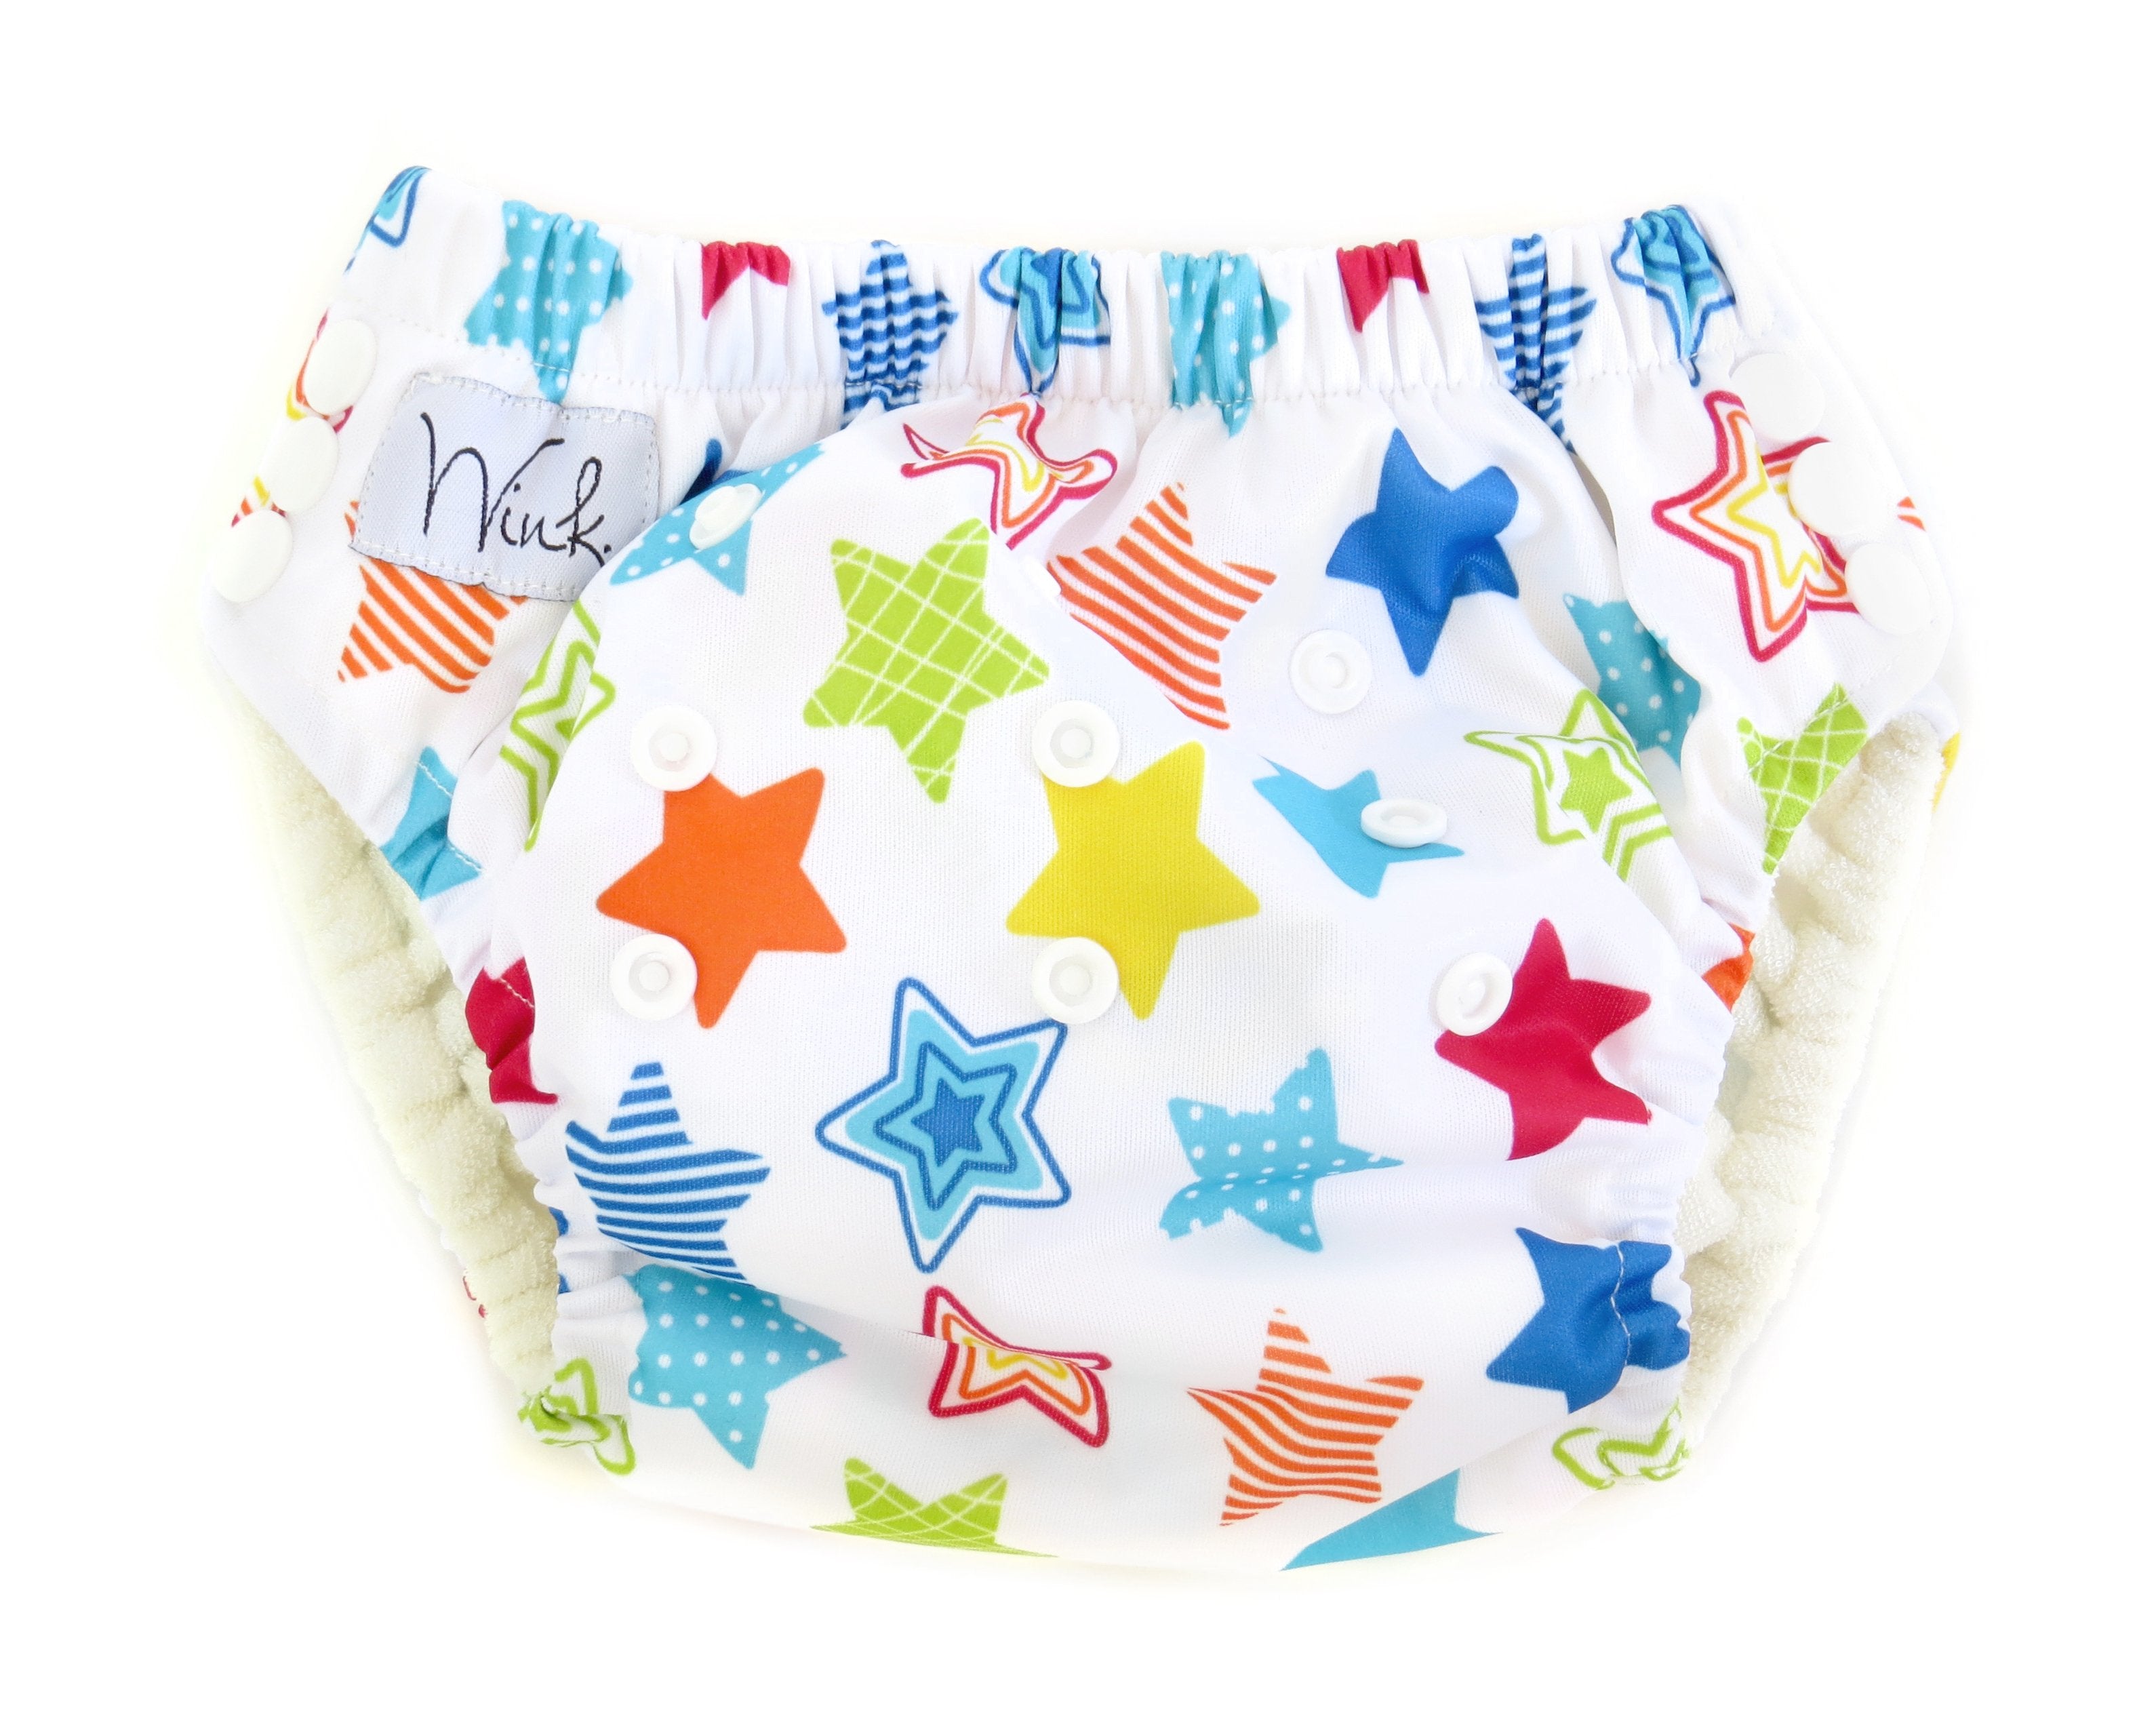 Big Kid Cloth Training Pants – Mother-ease Cloth Diapers